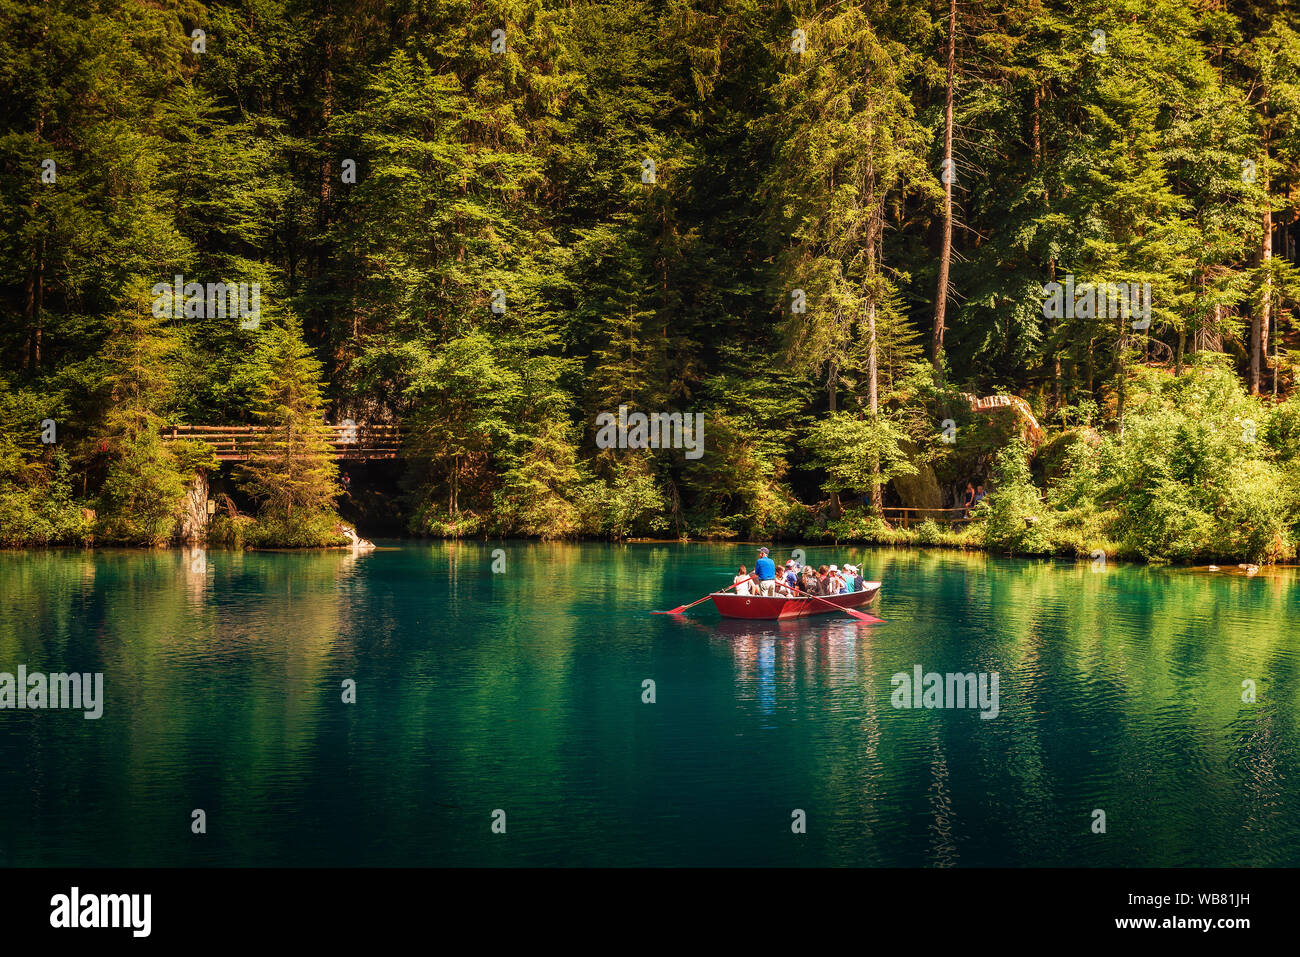 Tourists taking a boat trip on Blausee Lake in Switzerland Stock Photo